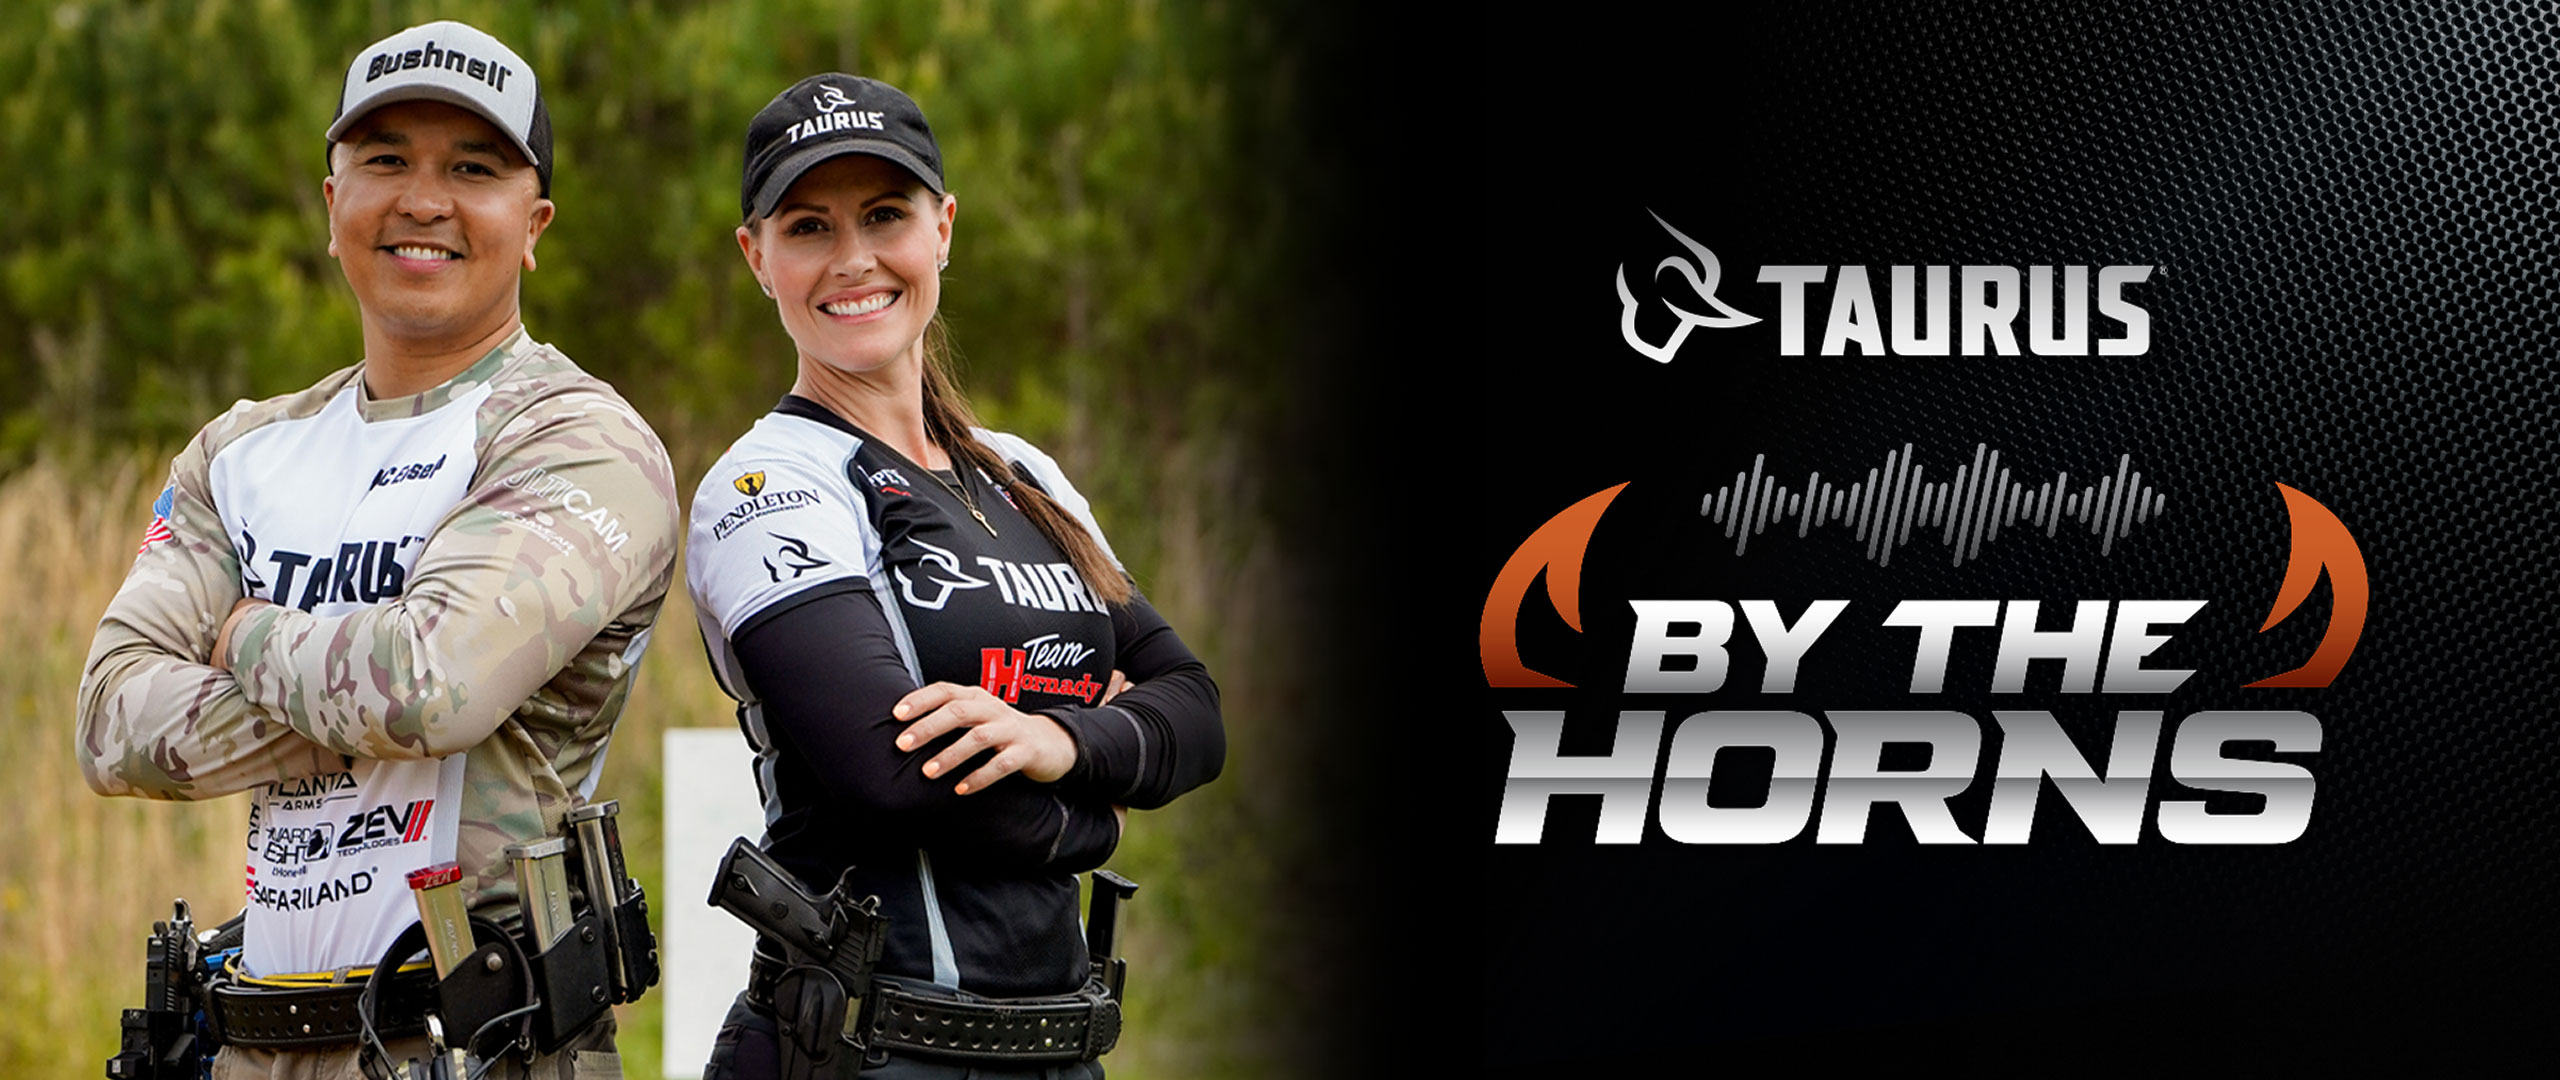 THE ALL-NEW PODCAST WITH TEAM TAURUS® MEMBERS JESSIE HARRISON & KC EUSEBIO.